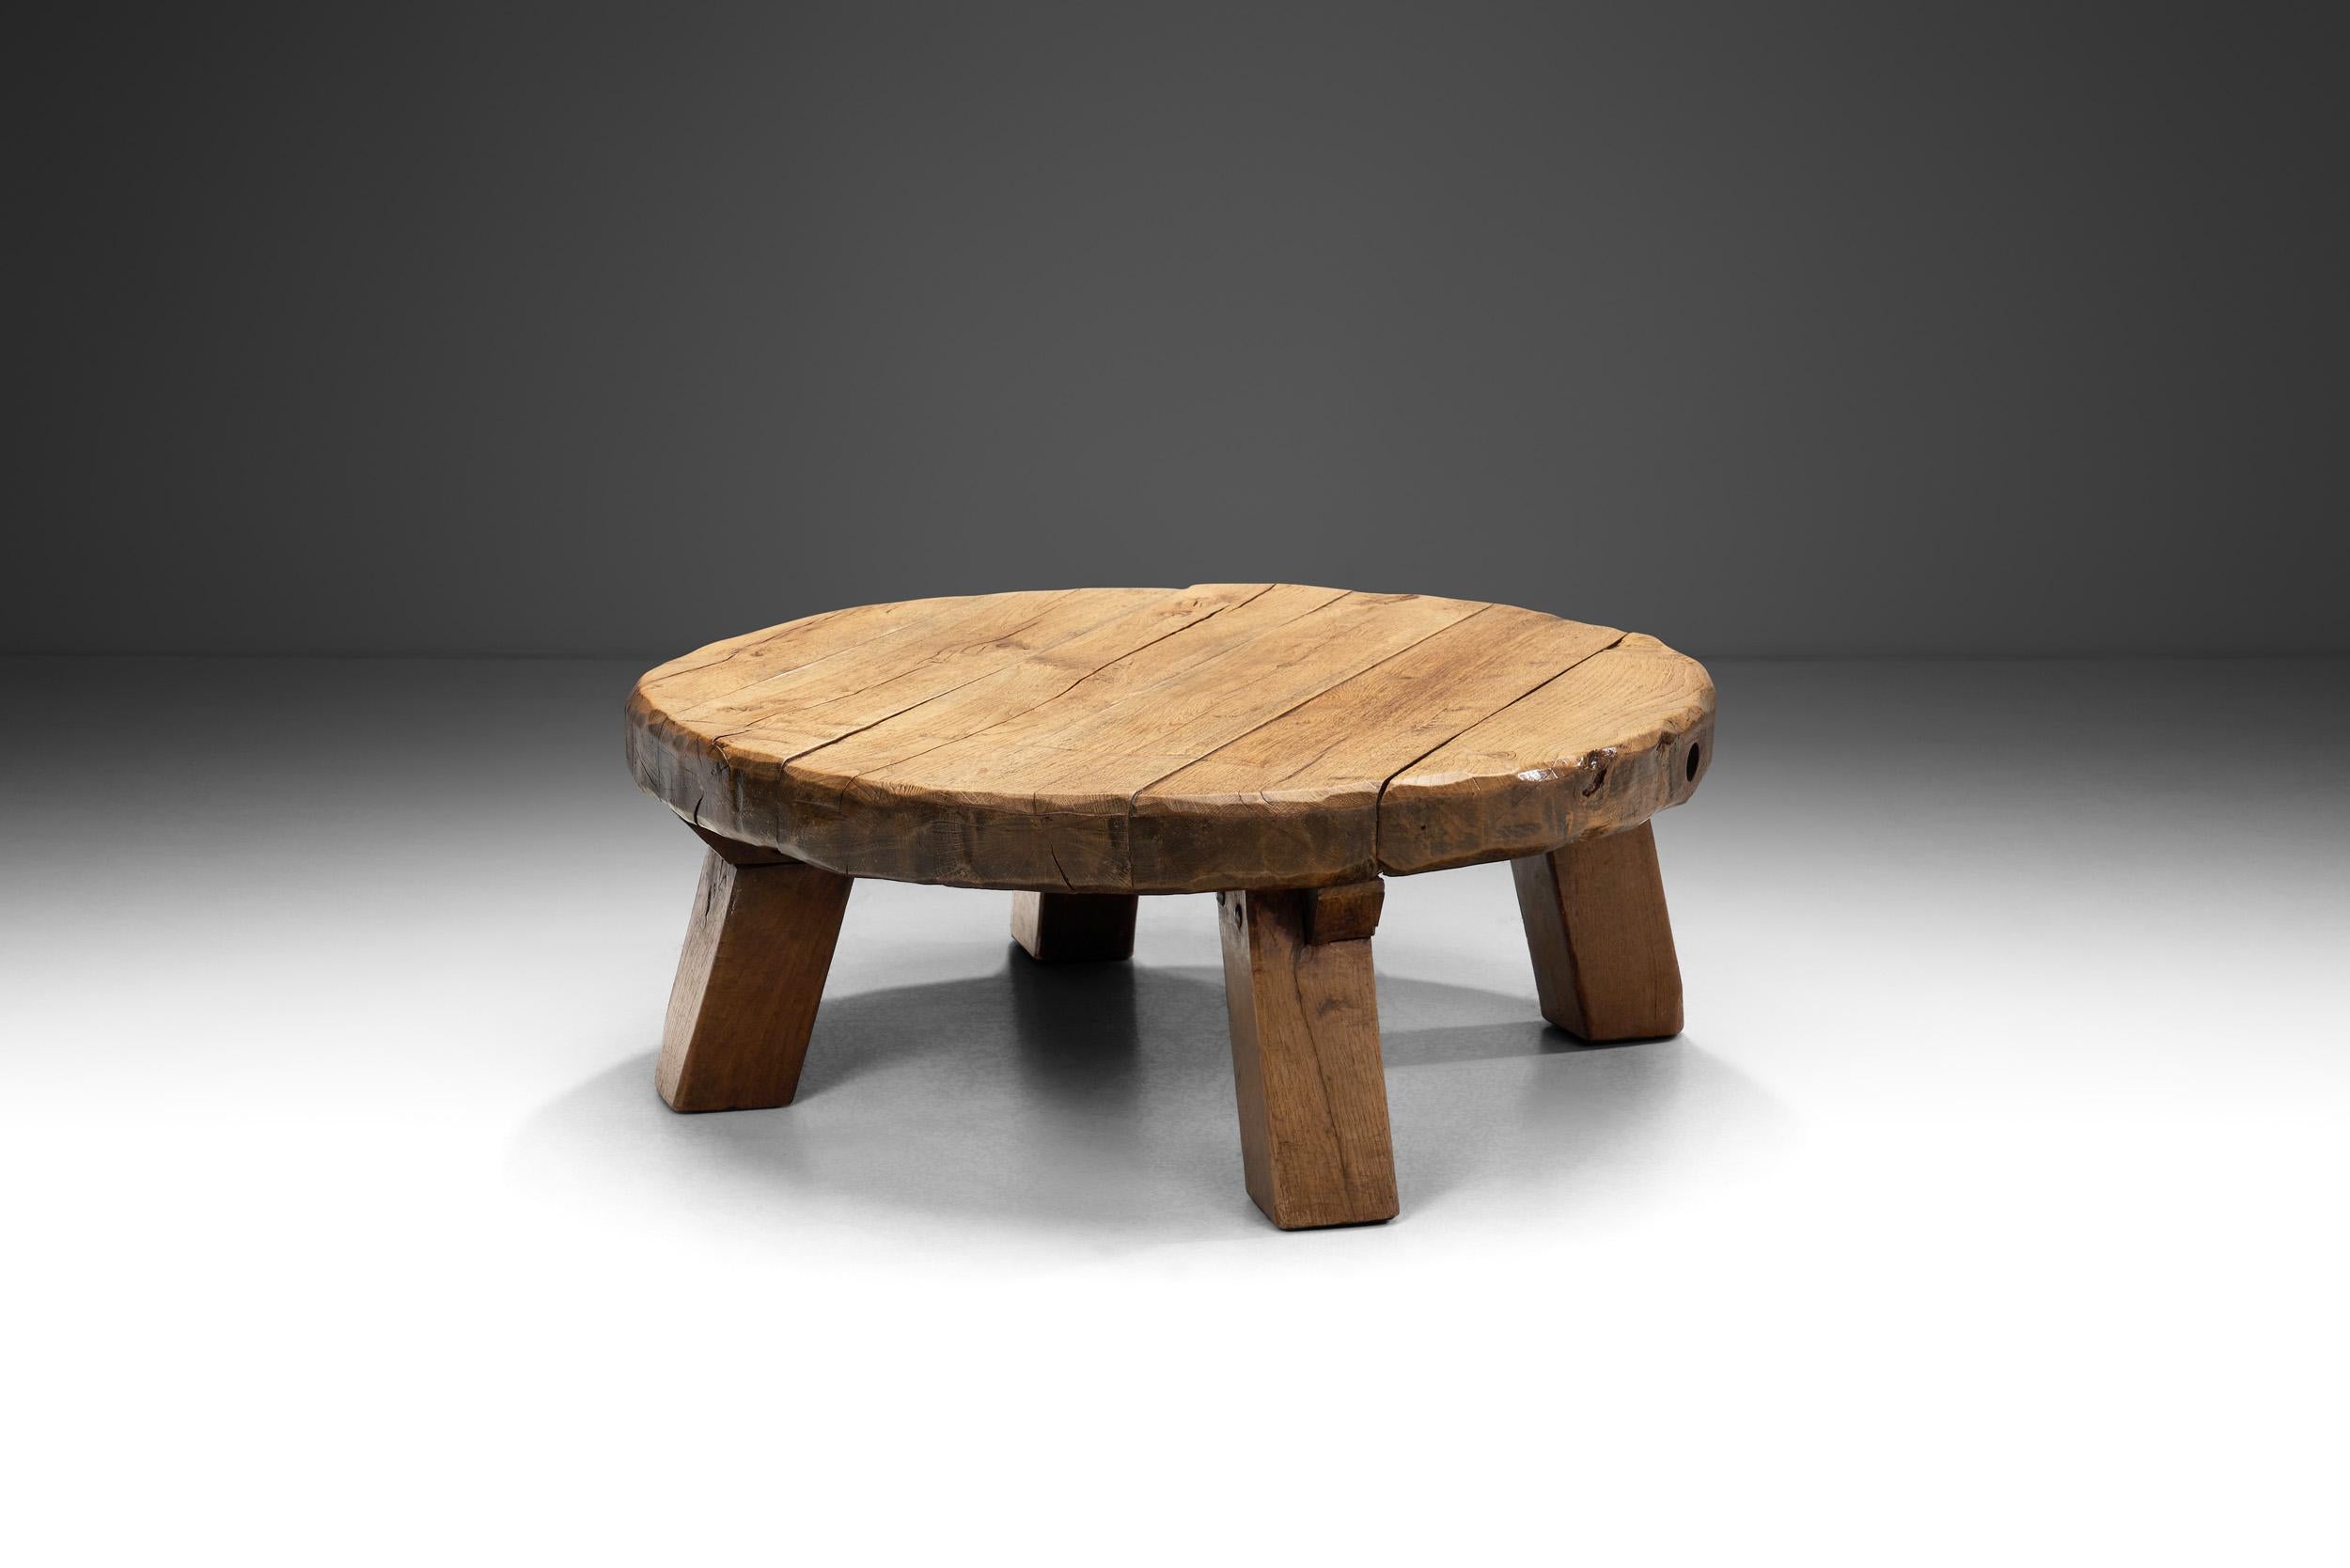 In most European mid-century design, there was an early emphasis on wood as it connected everyday objects, such as furniture, to nature. This rustic, solid wood coffee table is a perfect example of this sentiment, and the visual benefits of an